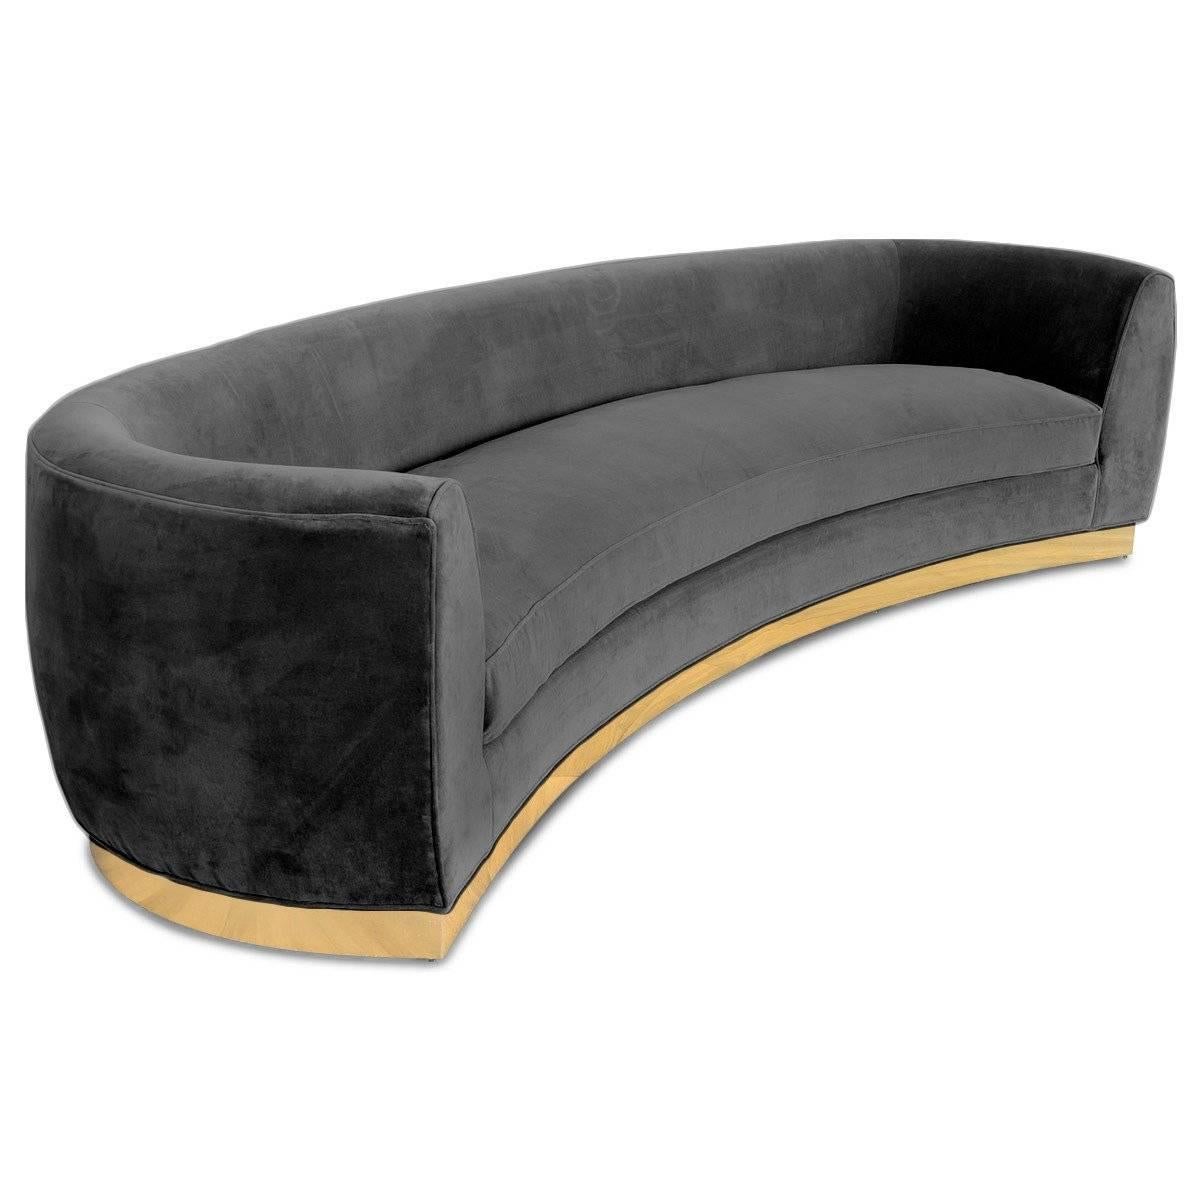 Art Deco Style Curved Sofa in Velvet Upholstery with Brass Toe-kick Base 10 foot For Sale 2